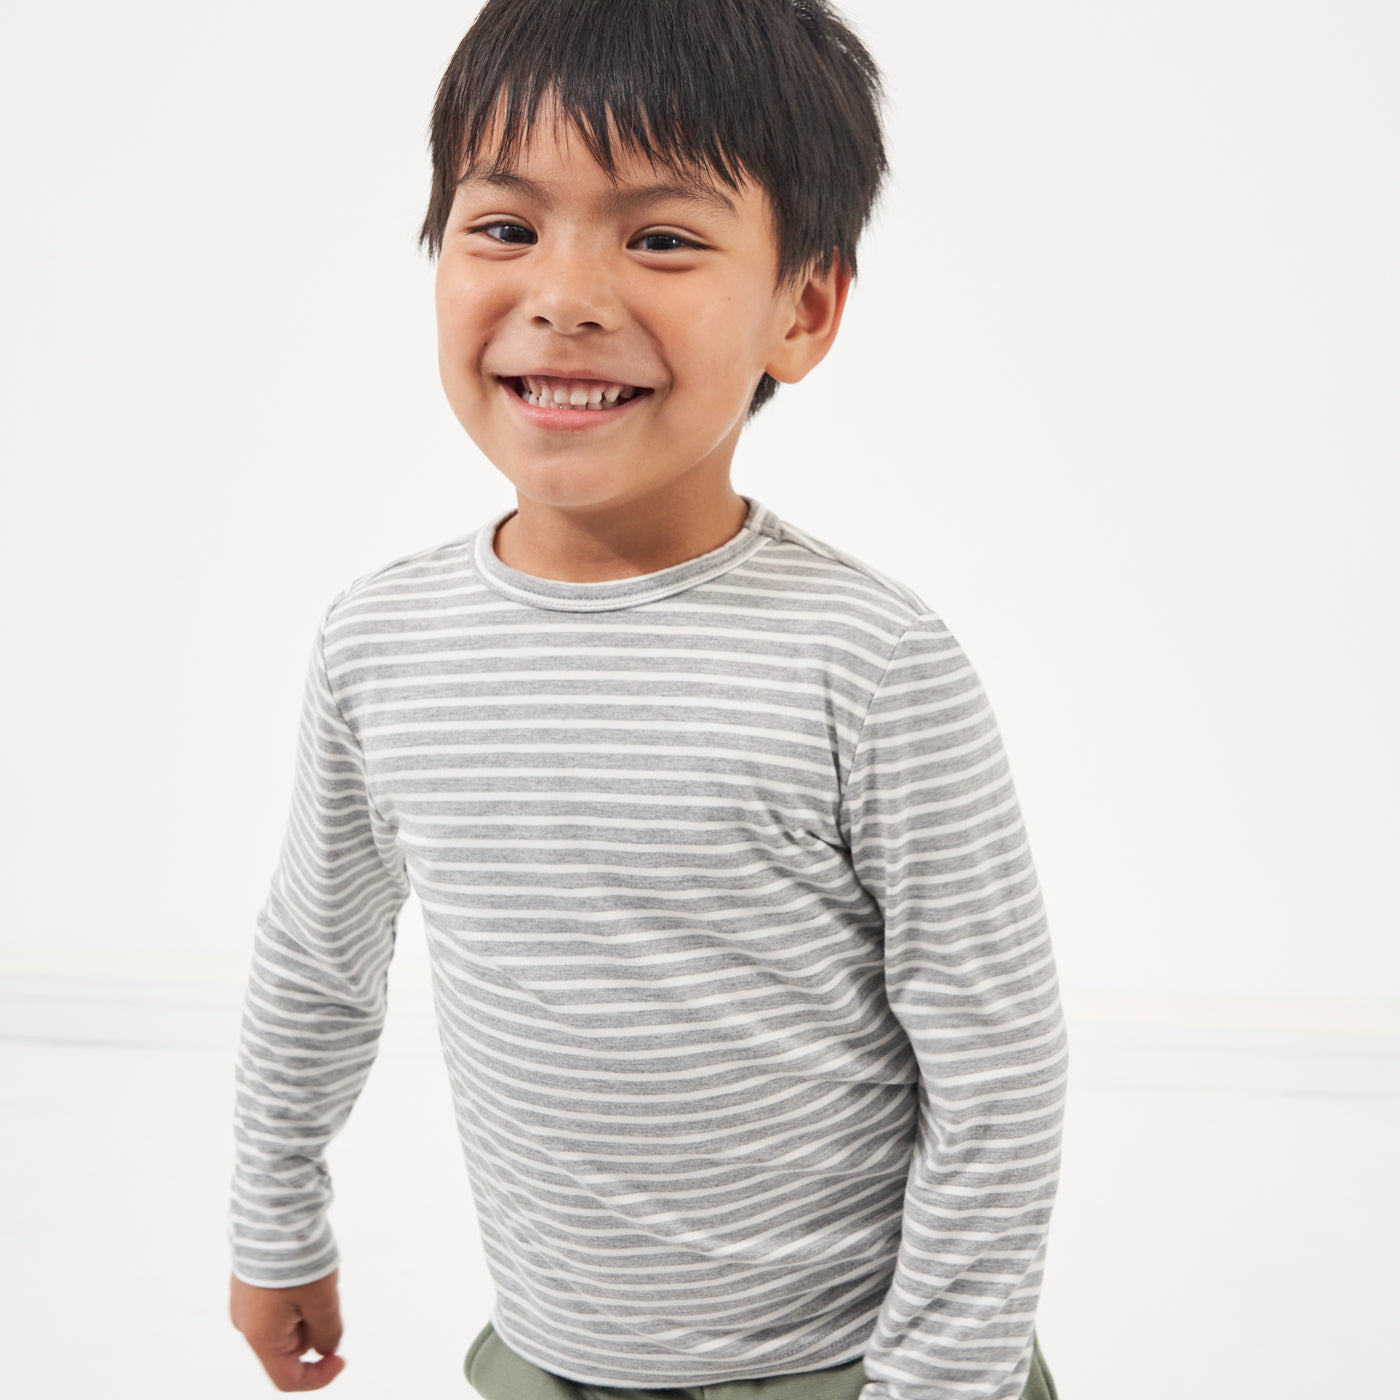 Child playing wearing a Heather Gray and Ivory Stripe classic tee paired with Moss joggers